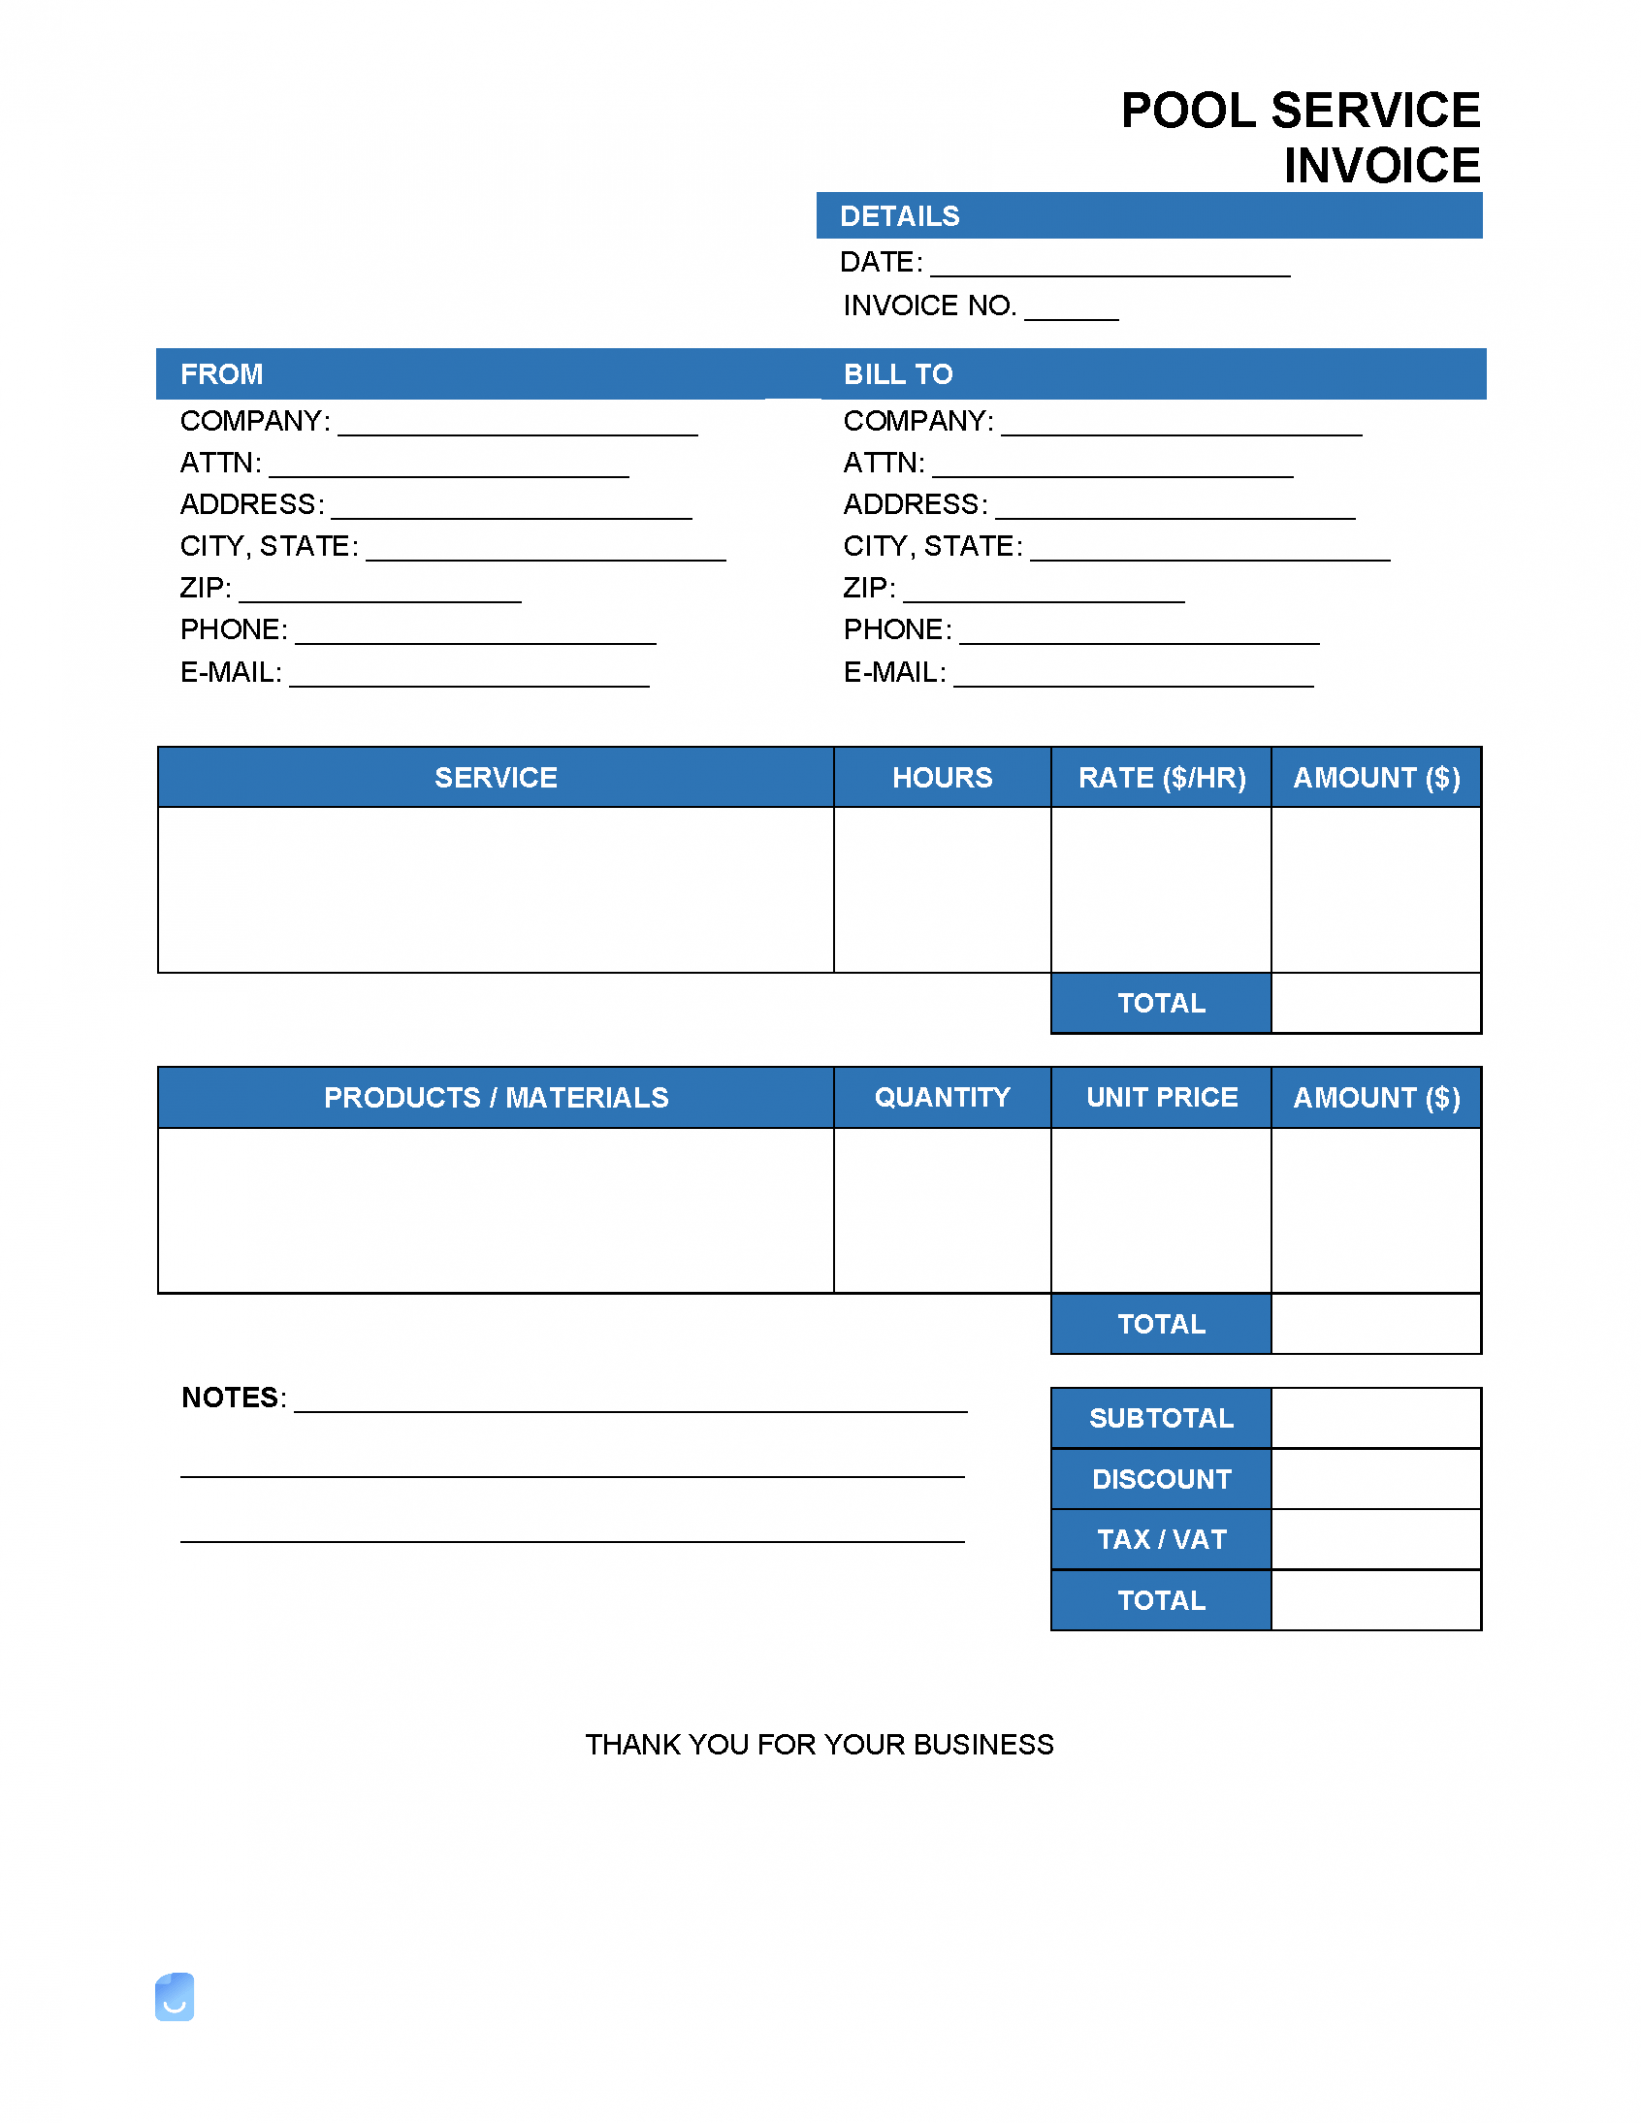 Sample Pool Service Invoice Template Excel